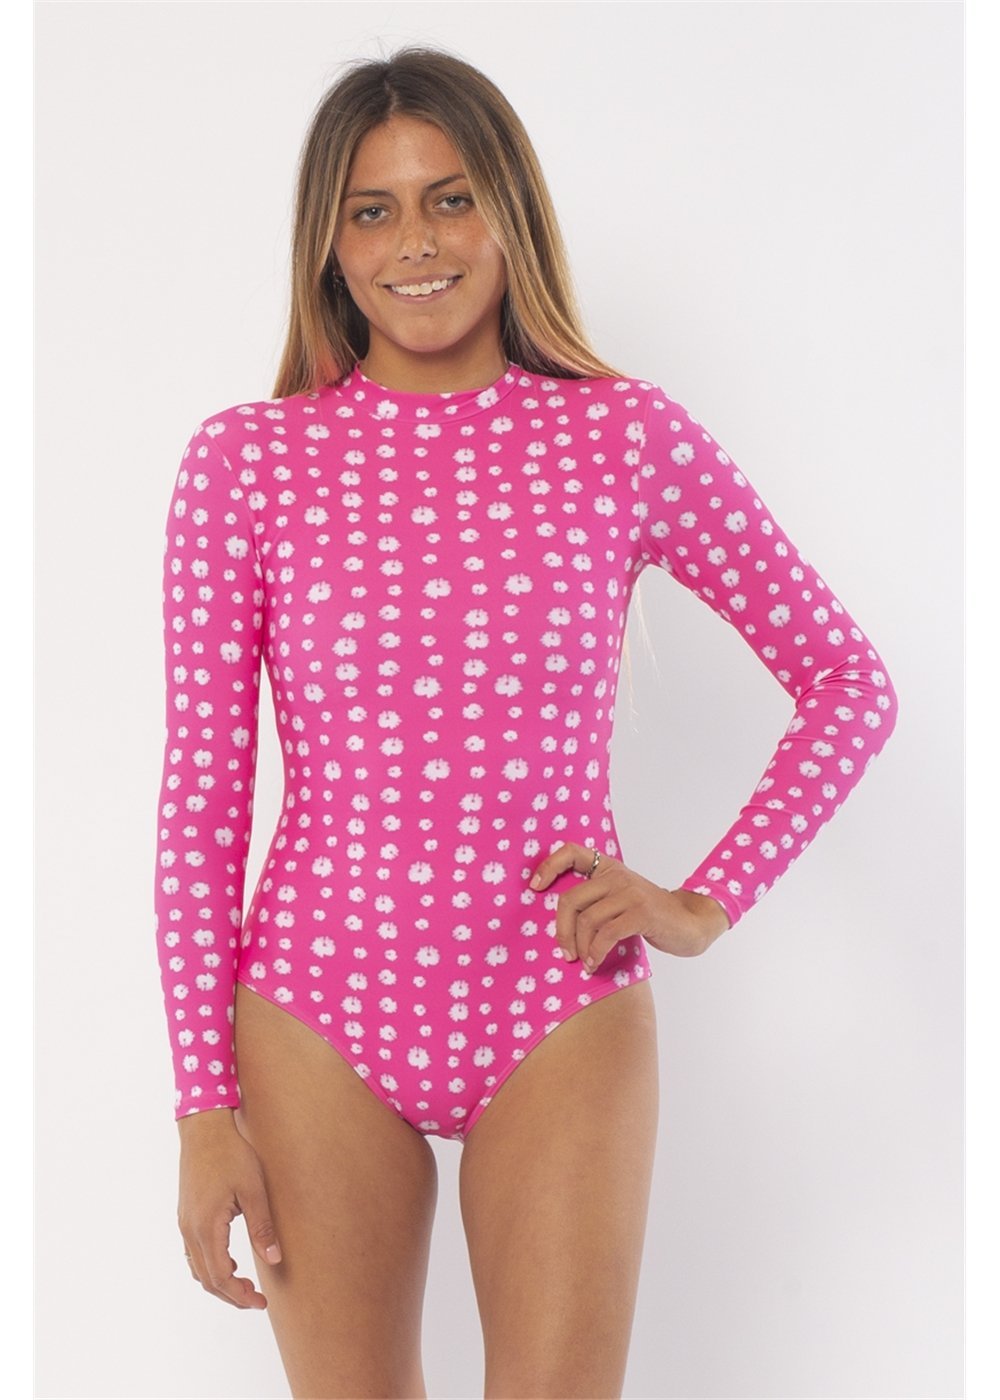 Nui L/S One Piece - Sisstrevolution